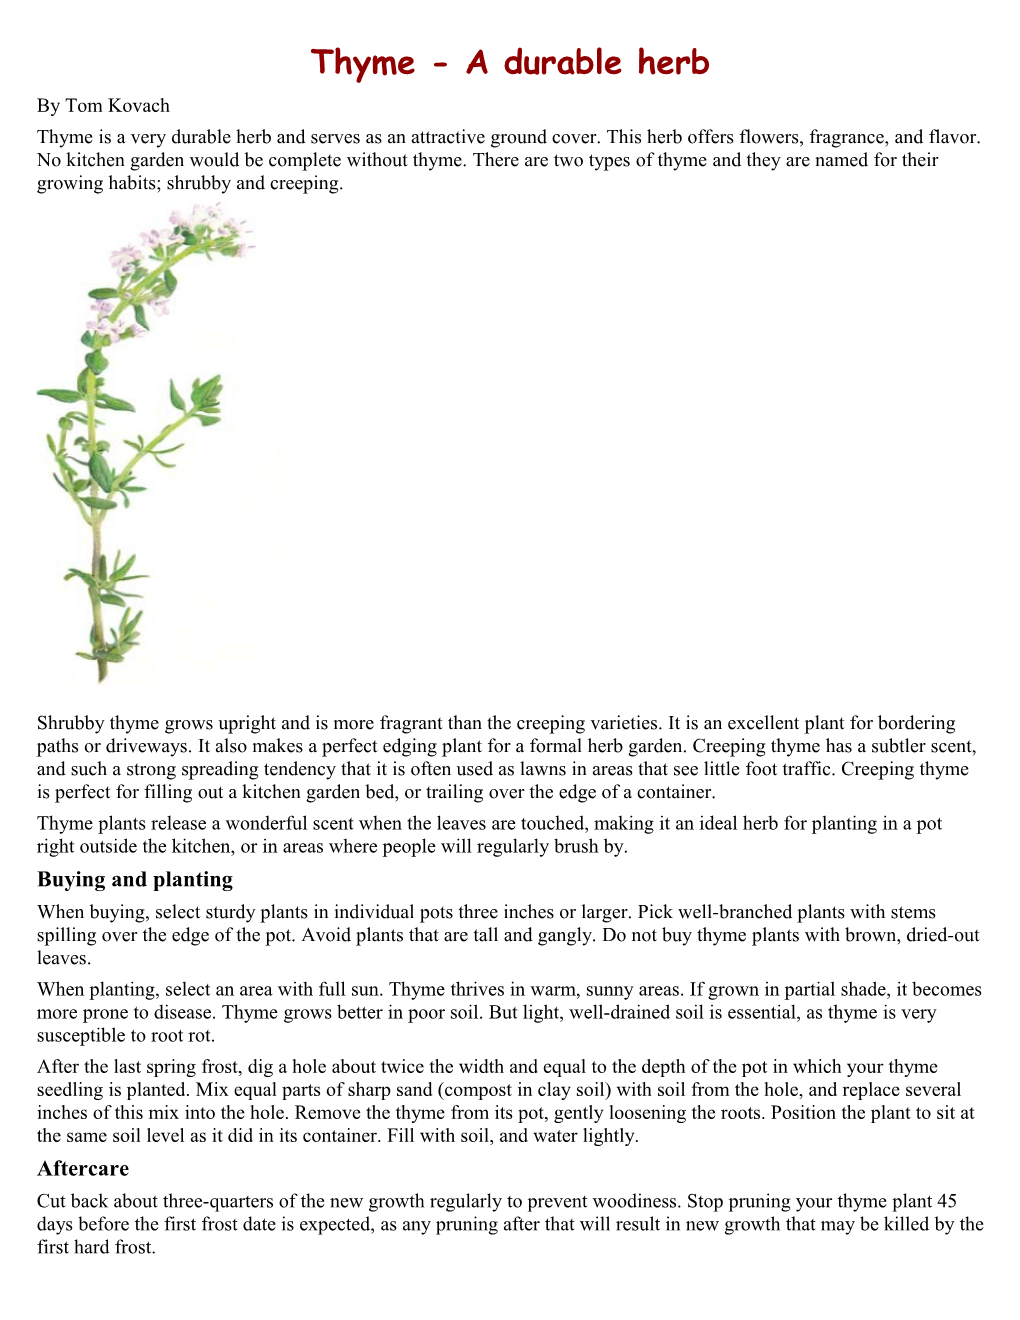 Thyme - a Durable Herb